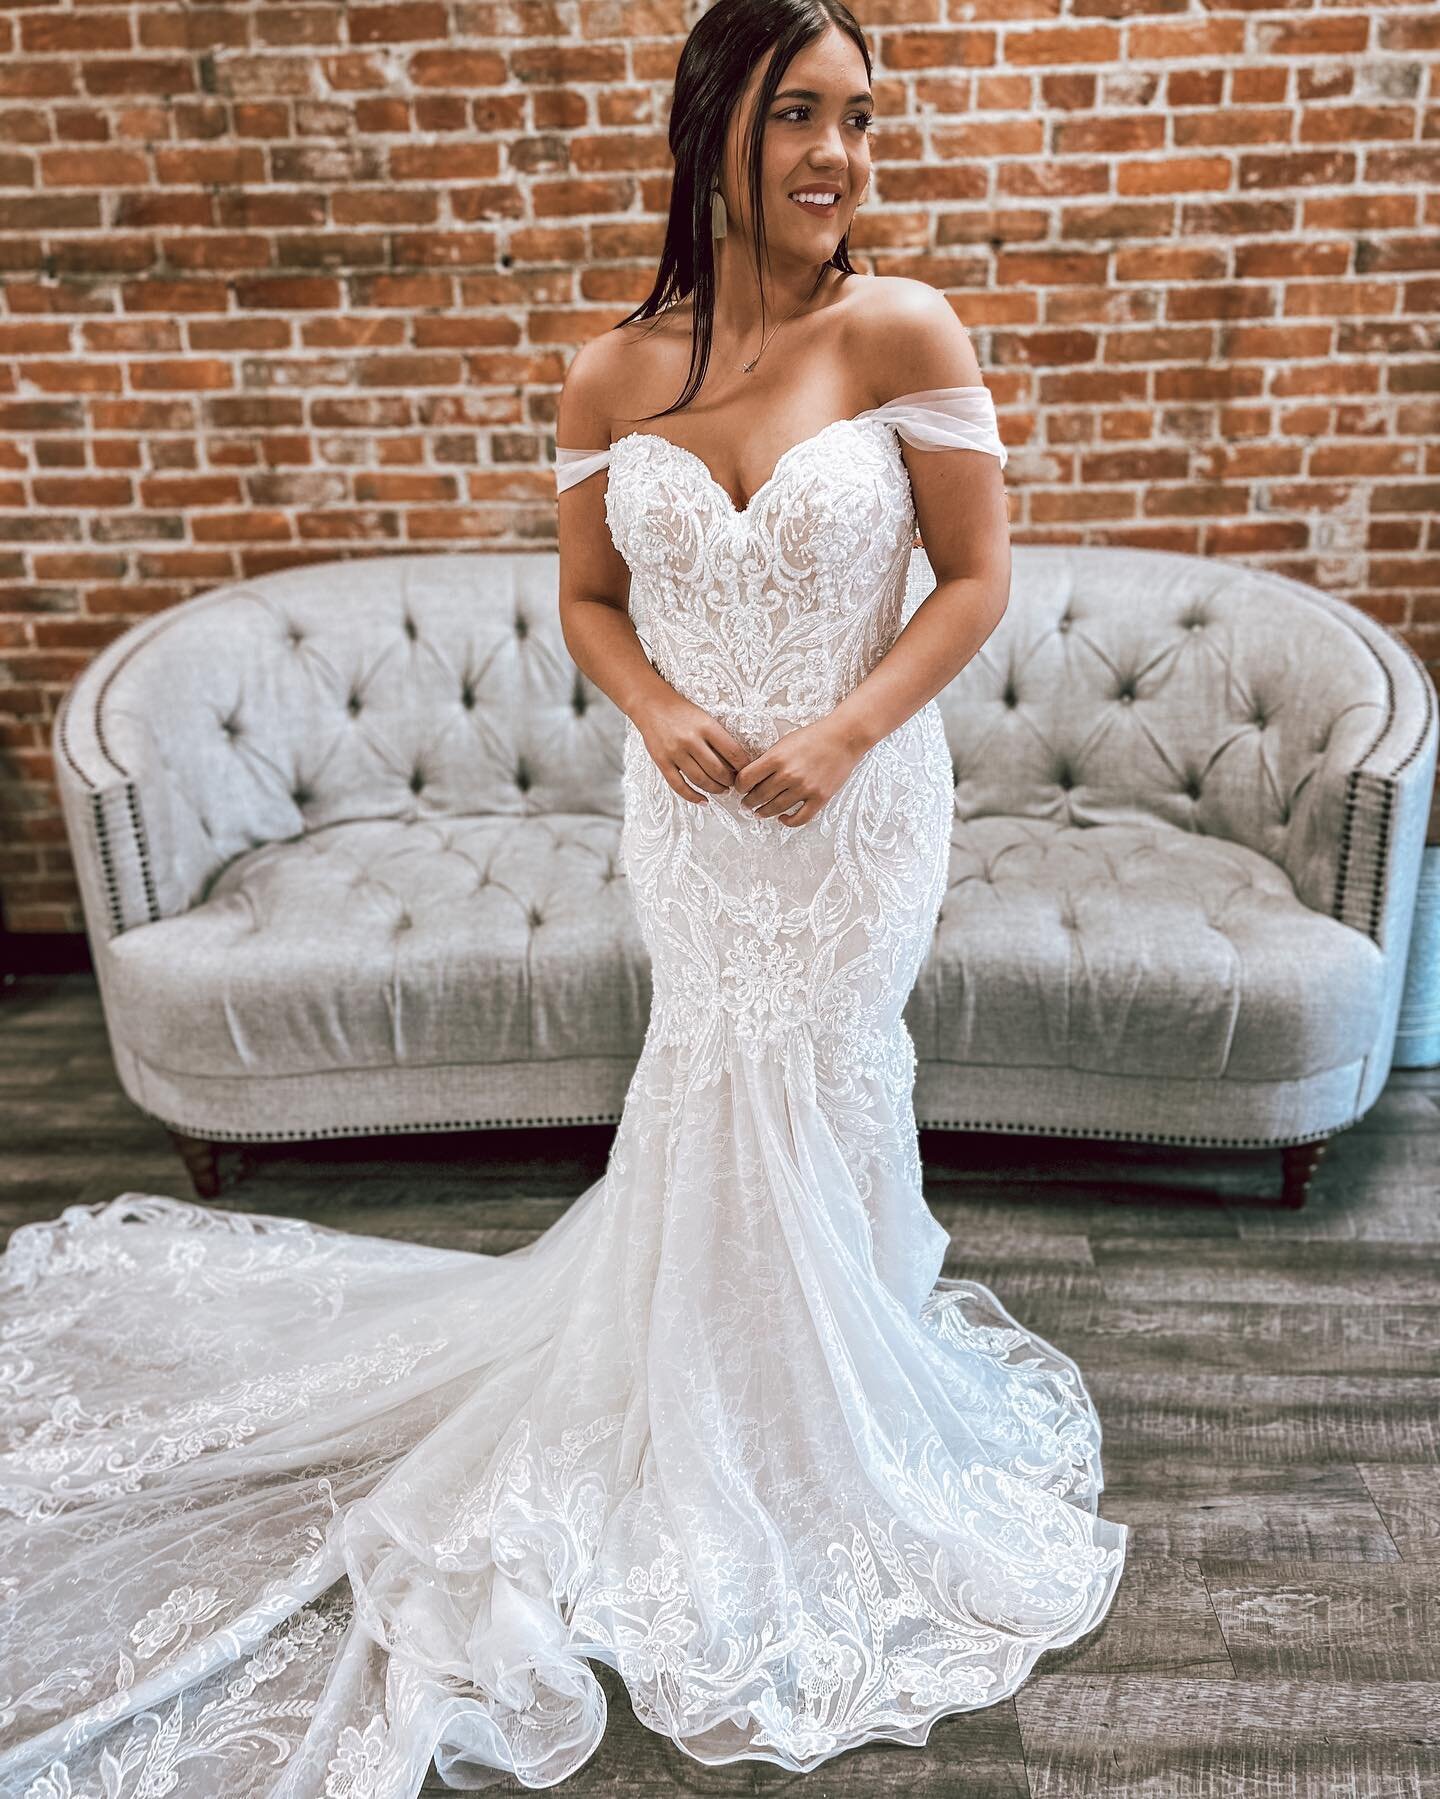 Sophia tolli Clarissa ✨😍

A traditional mermaid with modern lace and sparkle 👏

#wildrosebridal